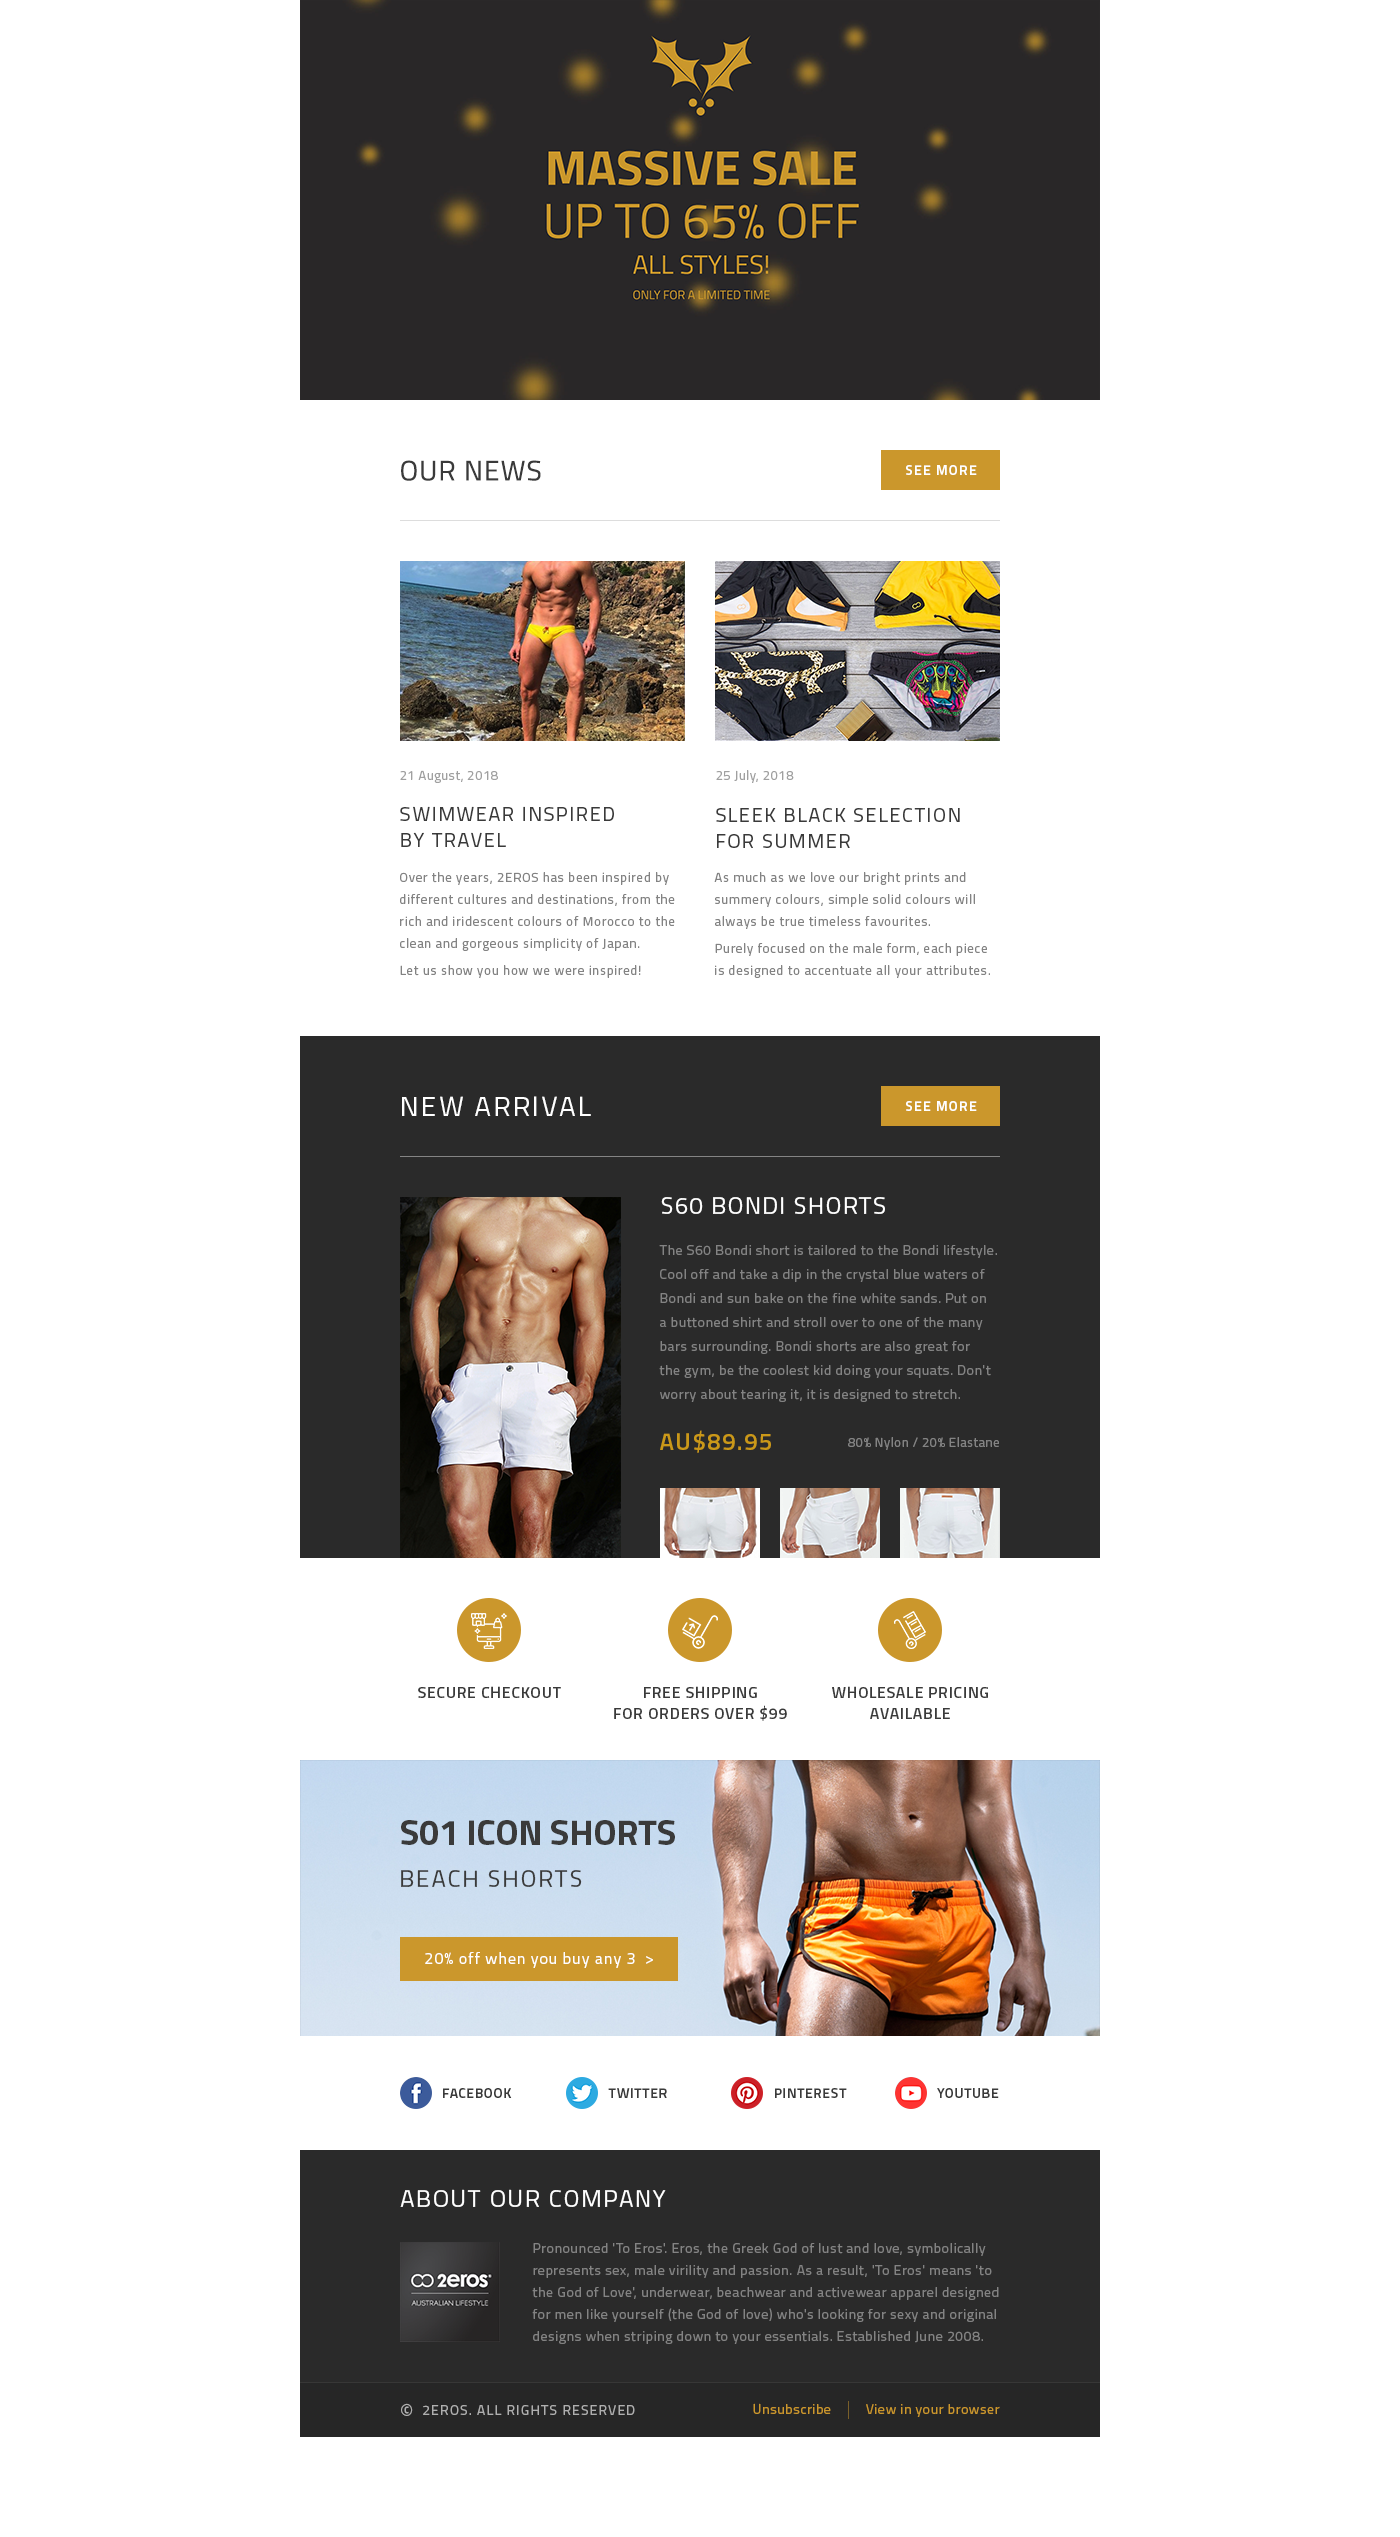 Email newsletter Retail Ecommerce e-commerce Shopping Clothing Interface user interface interface design